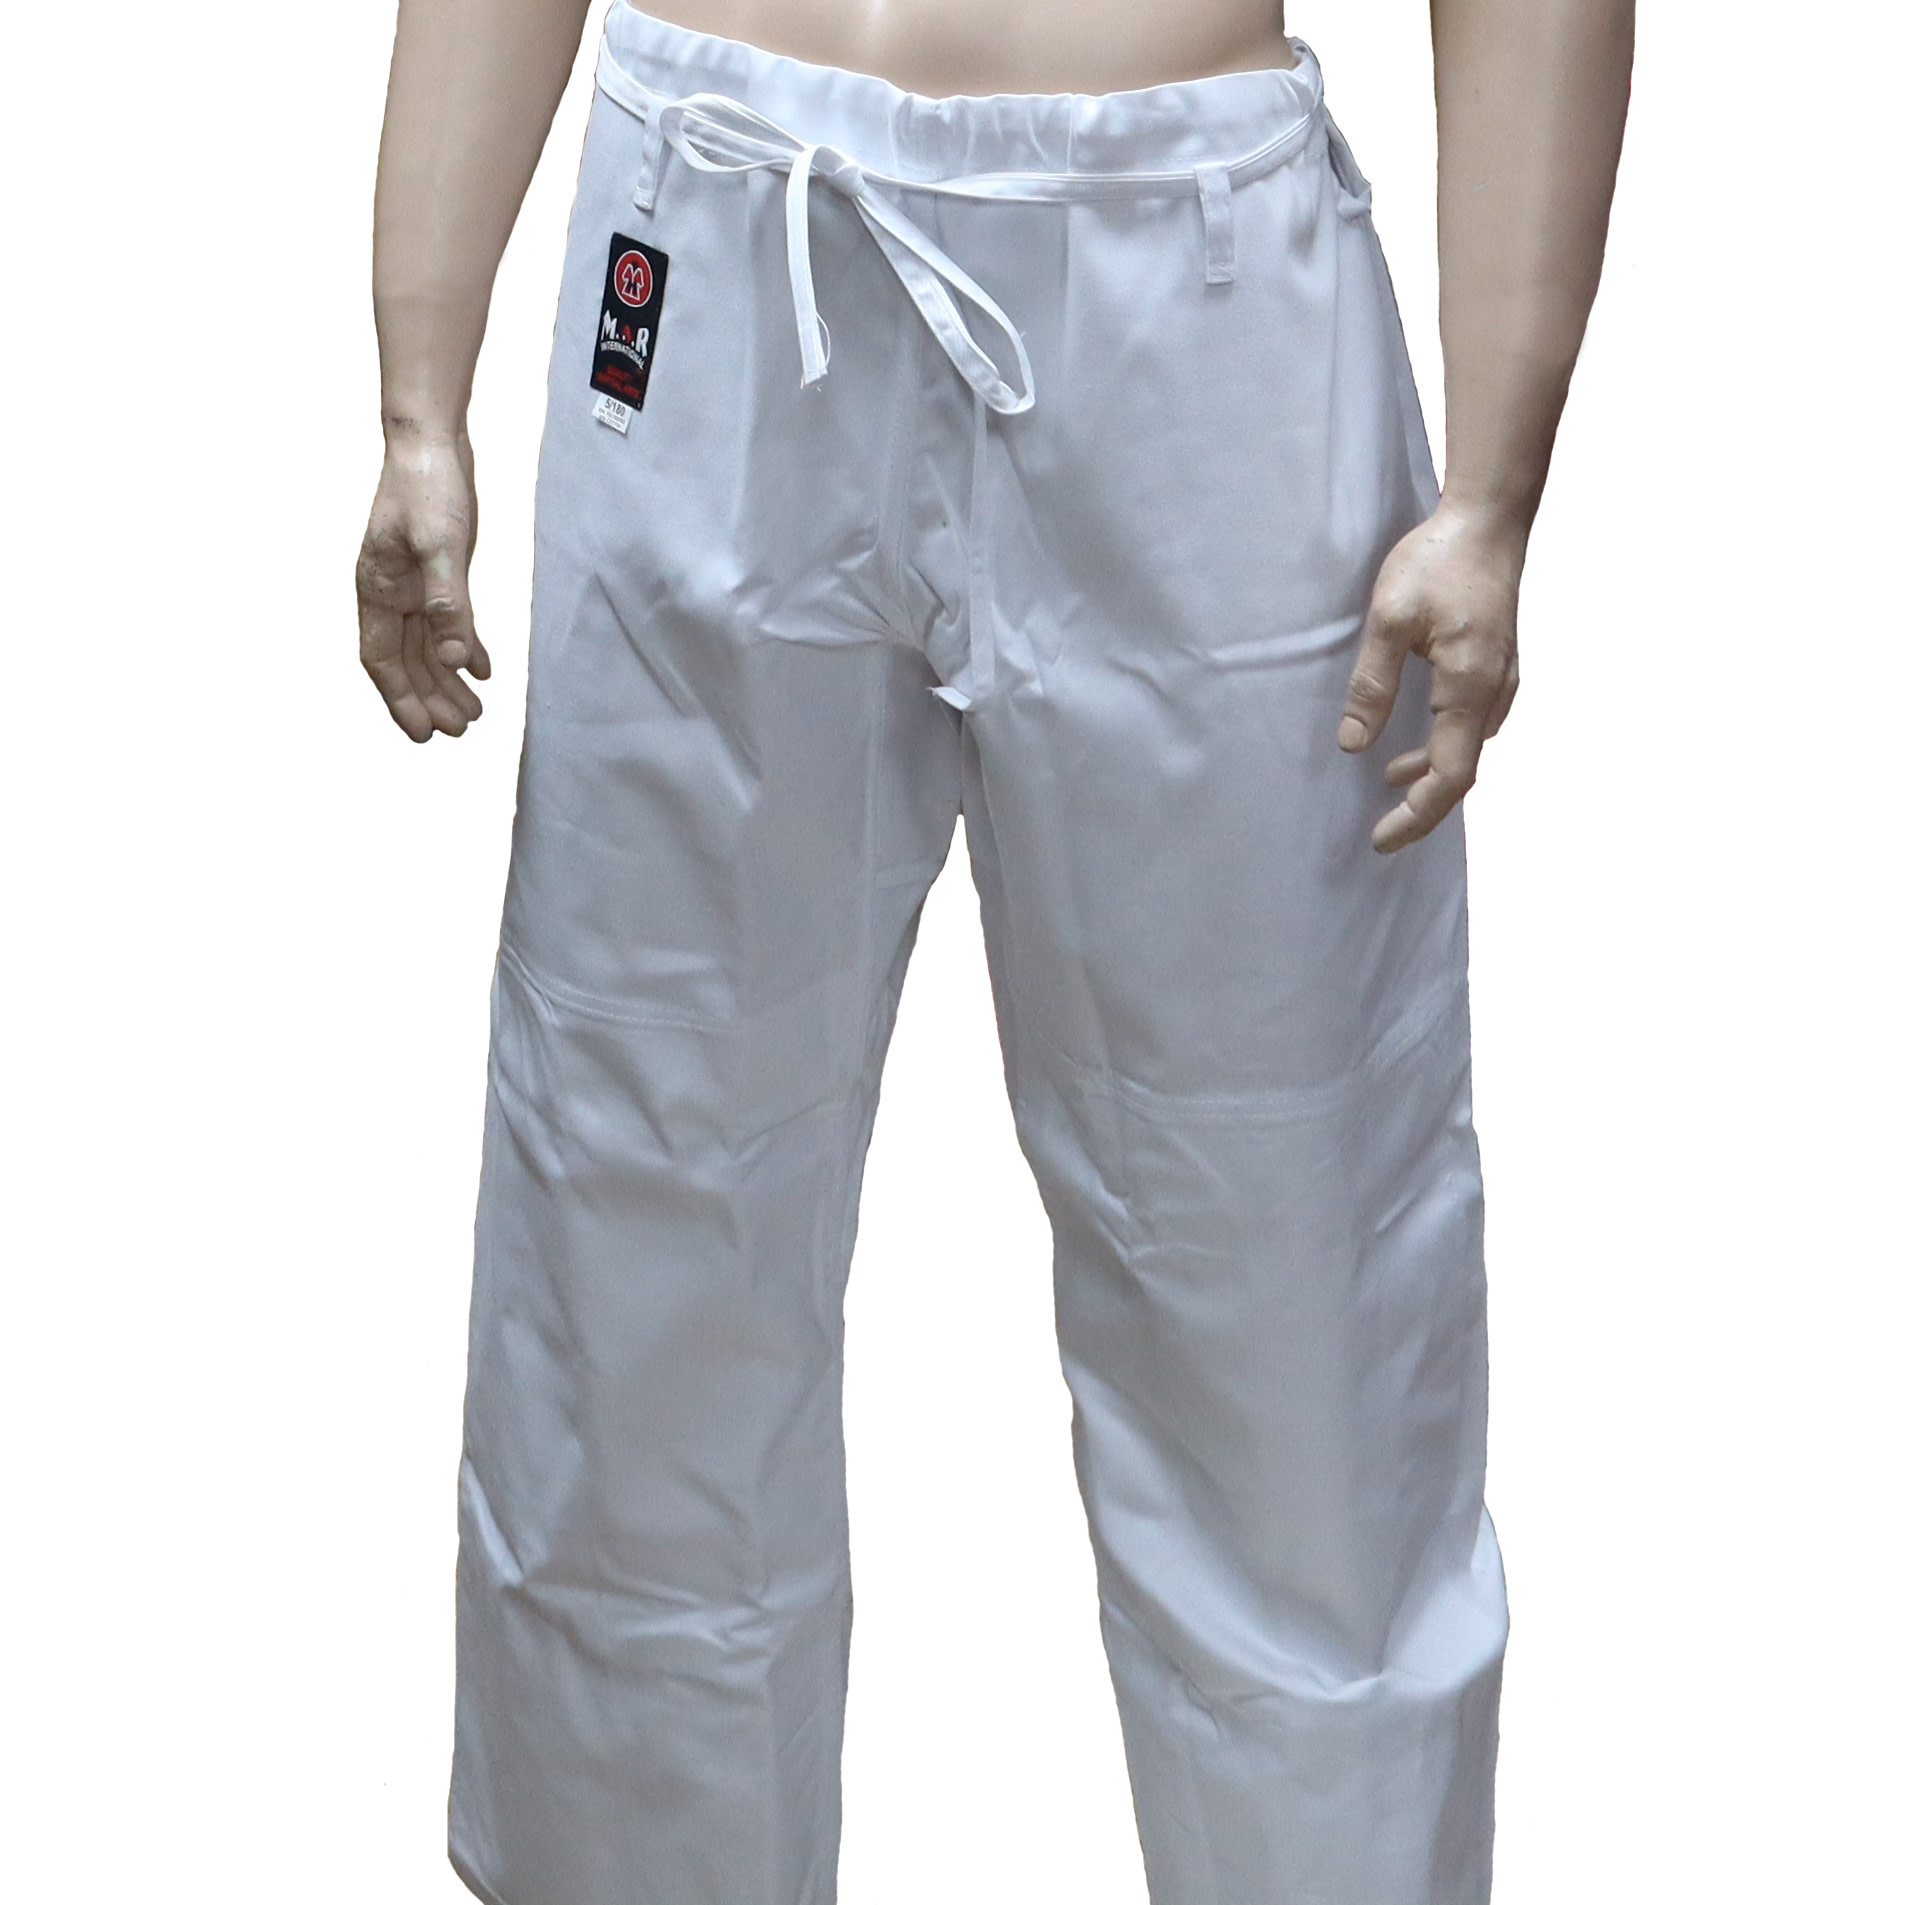 White Judo Trousers are perfect replacement Gi bottoms - Enso Martial ...